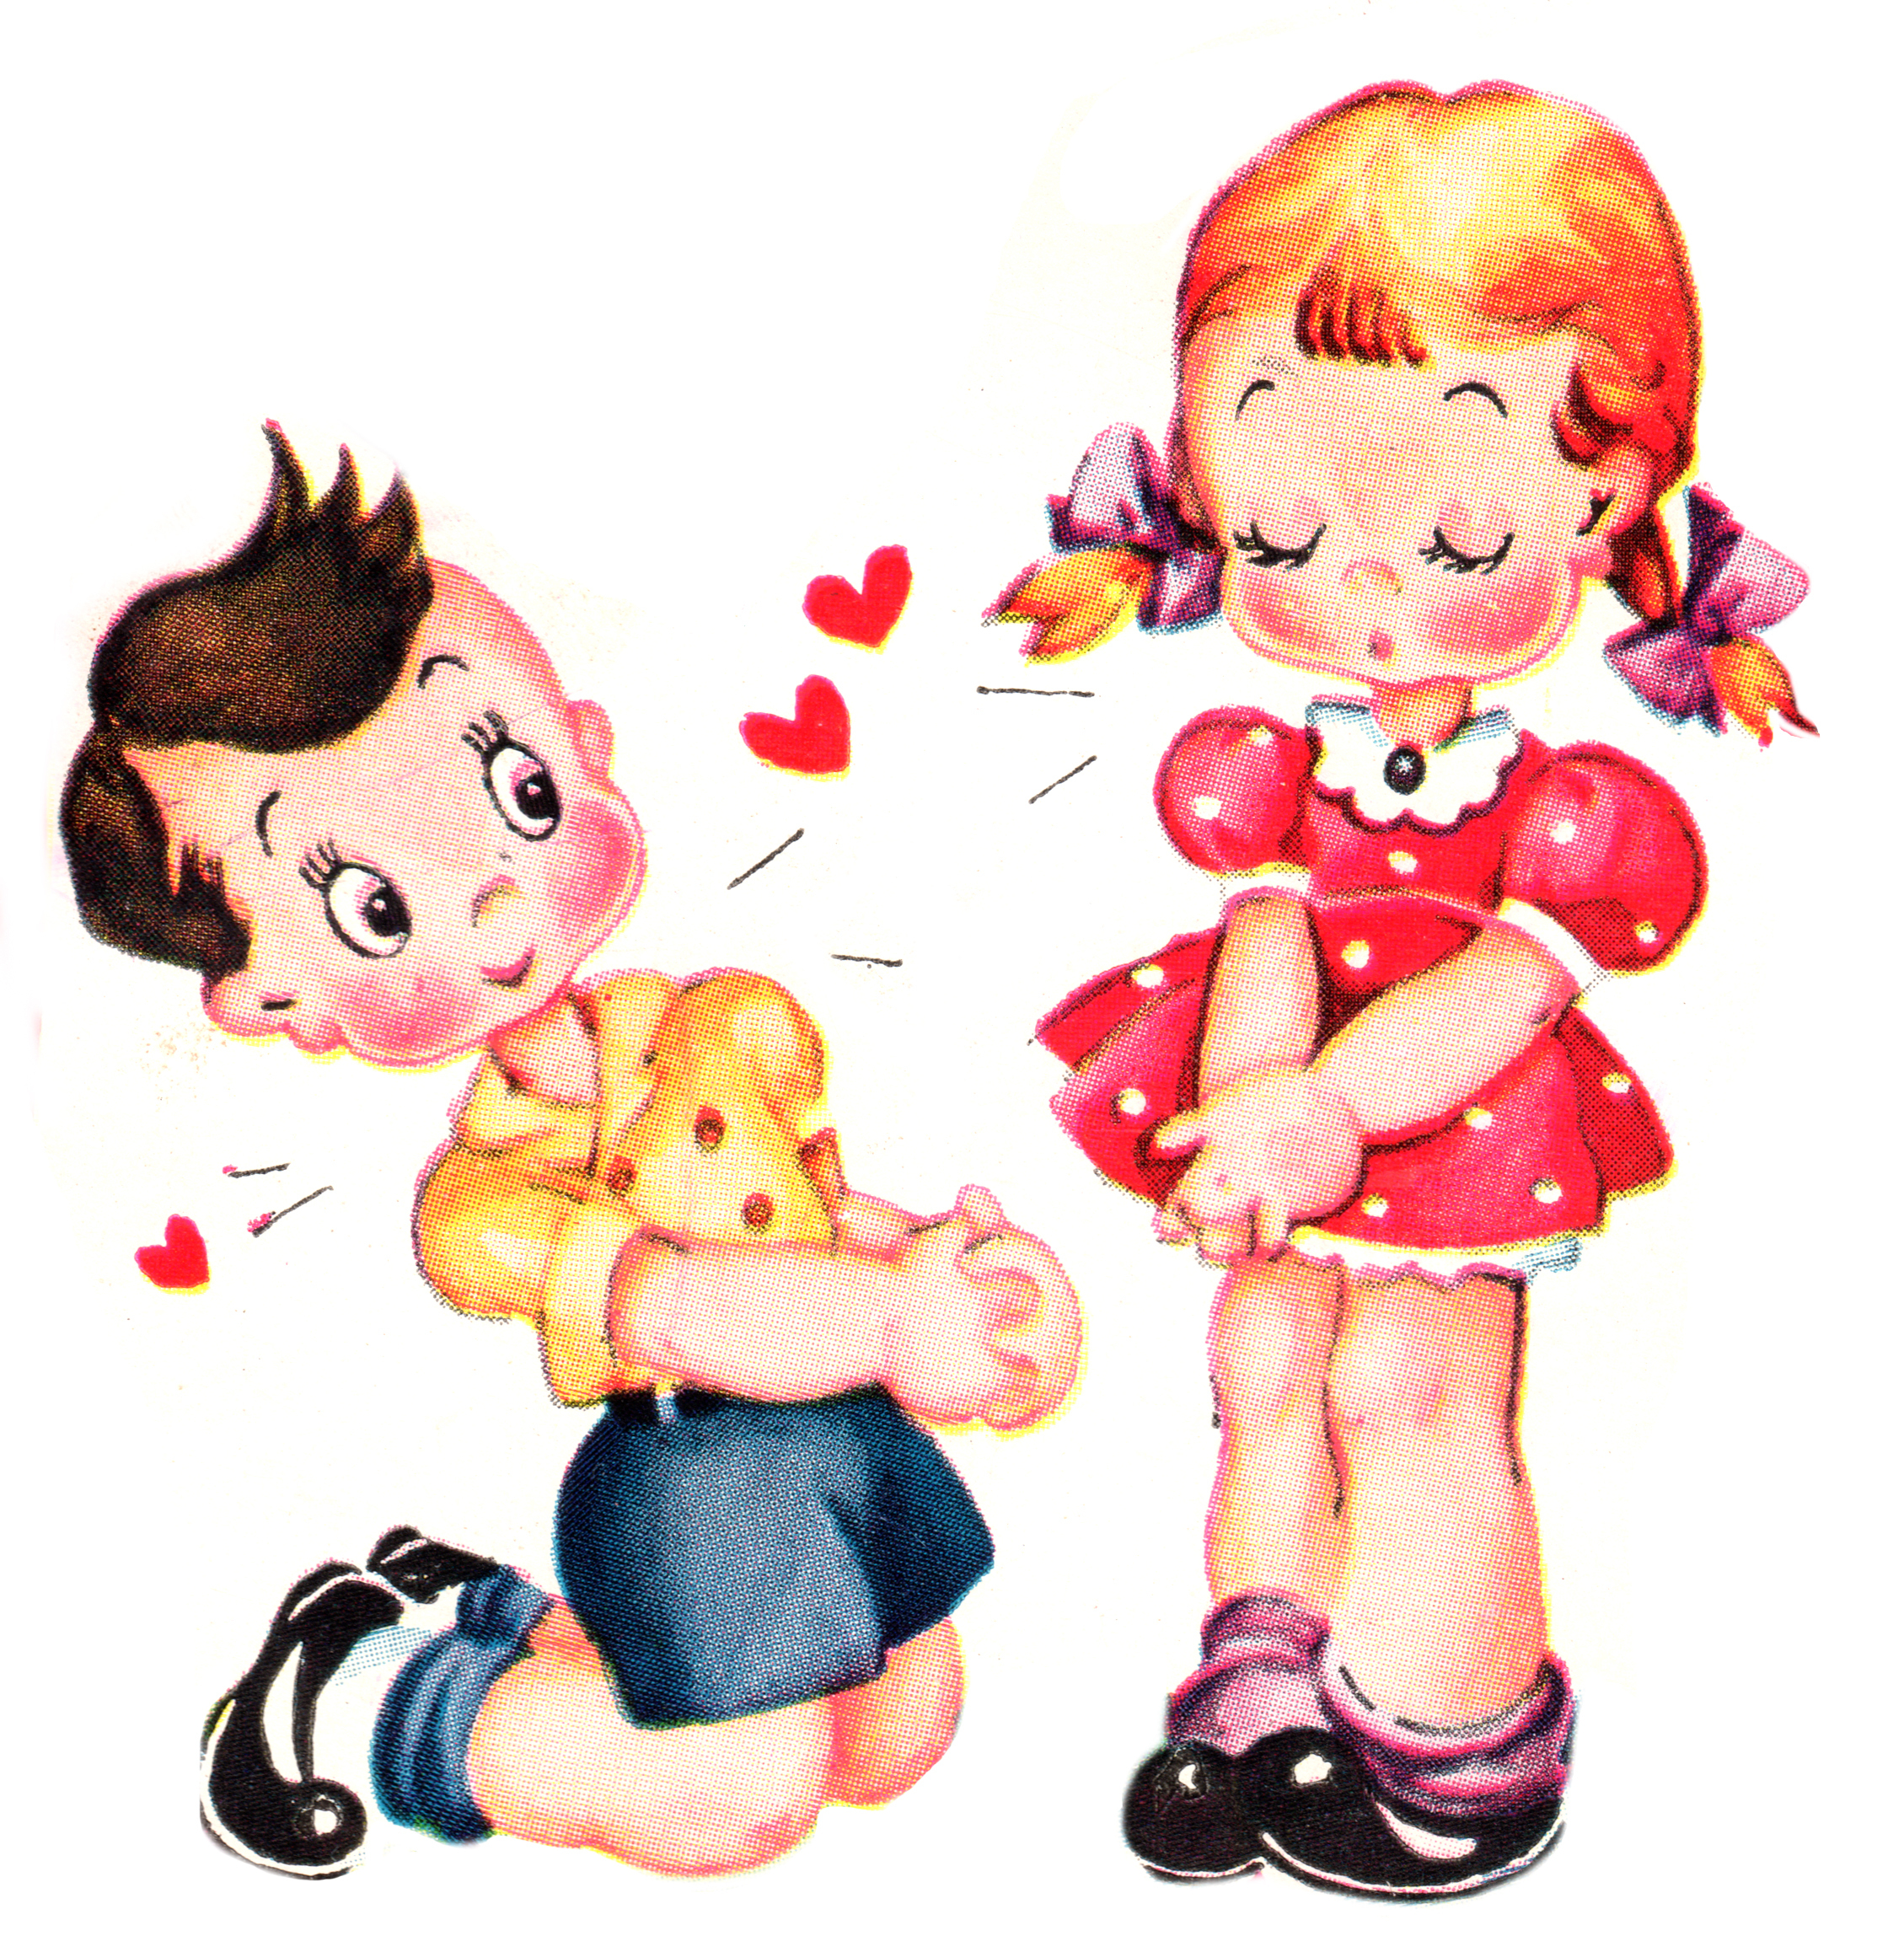 Cute Vintage Valentines Day Clip Art - Free Pretty Things For You - Free Printable Vintage Valentine Pictures